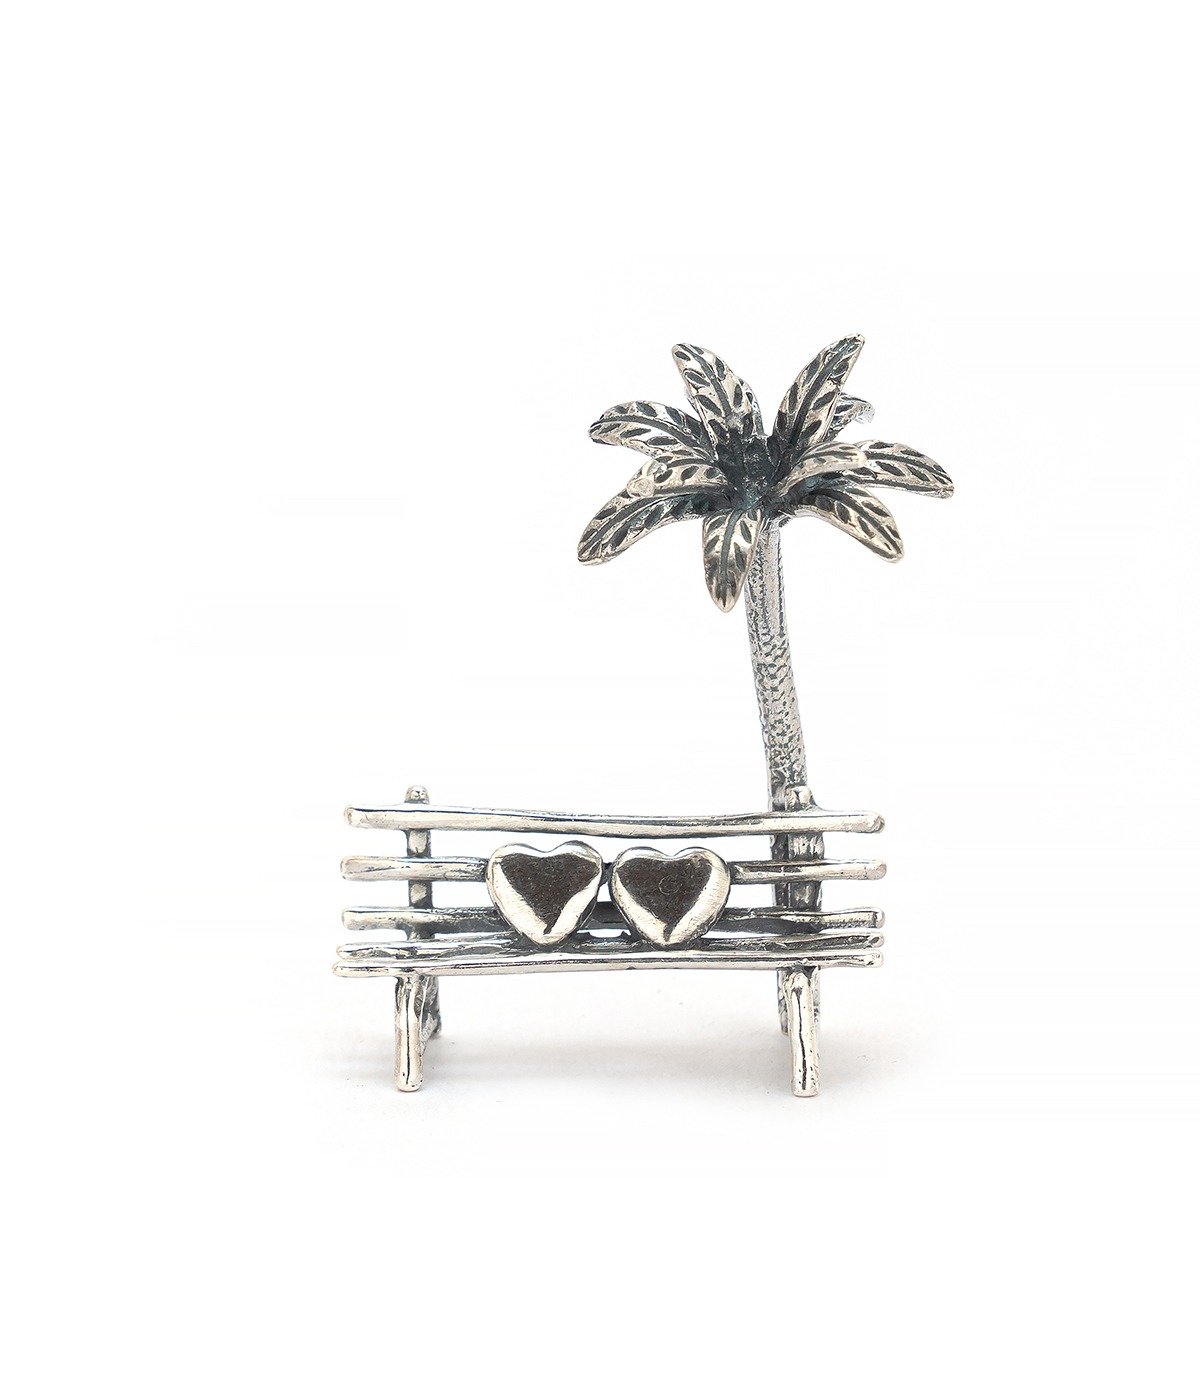 92.5 STERLING SILVER  MINIATURE COCONUT TREE AND WOODEN BENCH FOR GIFT